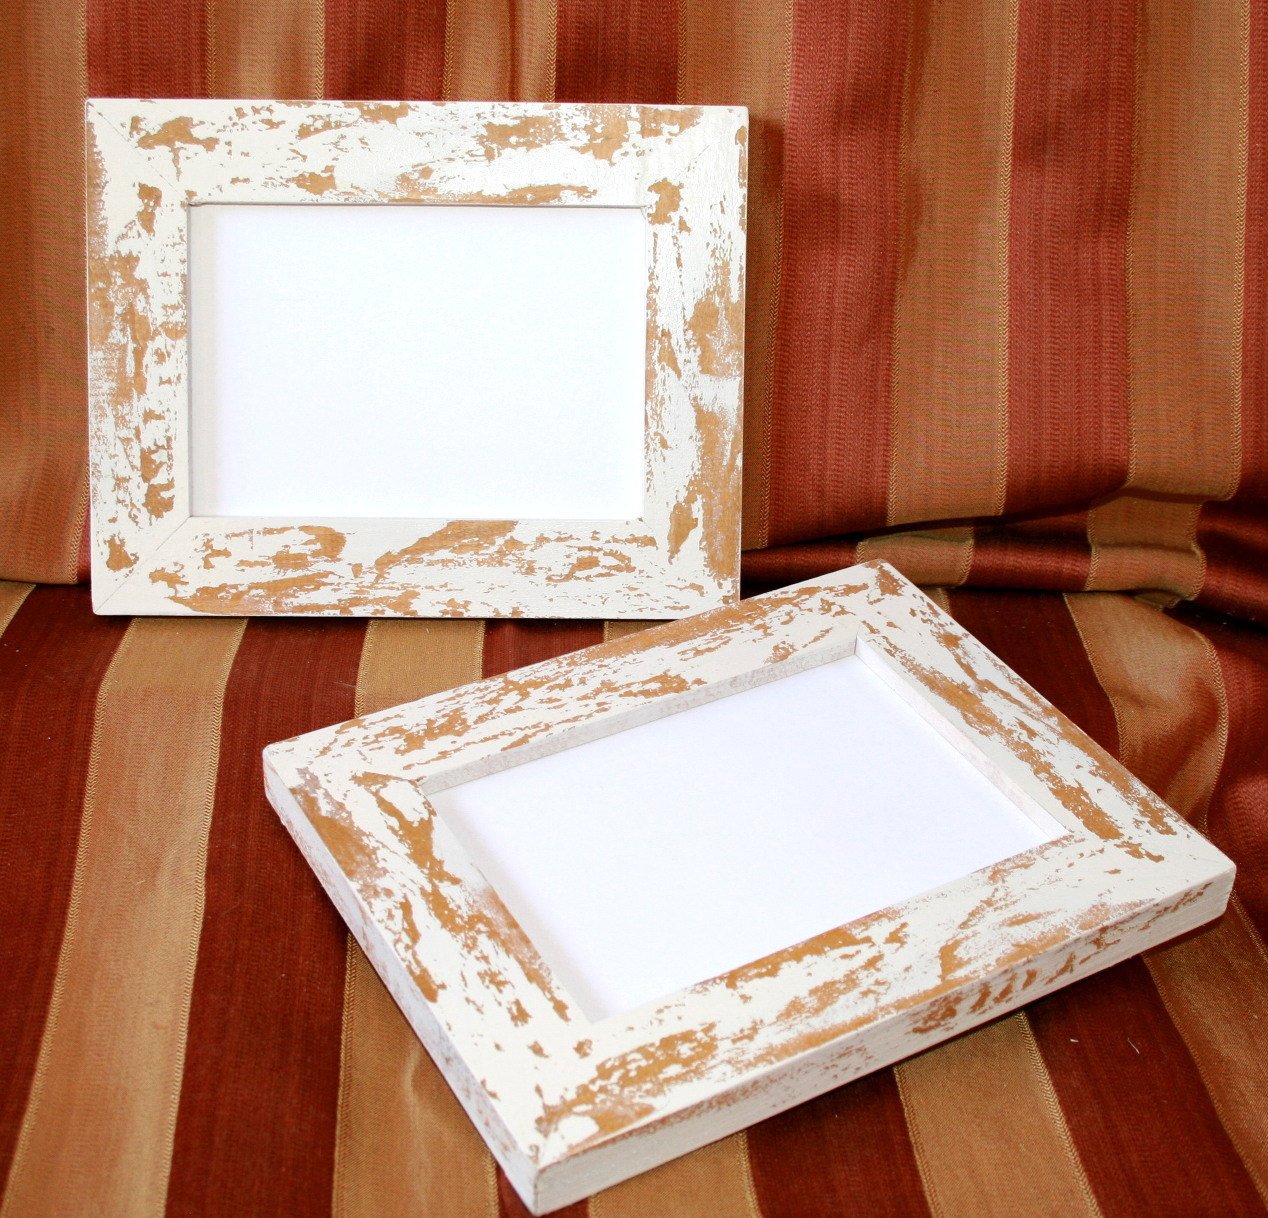 Picture Frames 2) 4x6, 5x5, 5x7 Or 6x6  picture frames in our chippy 